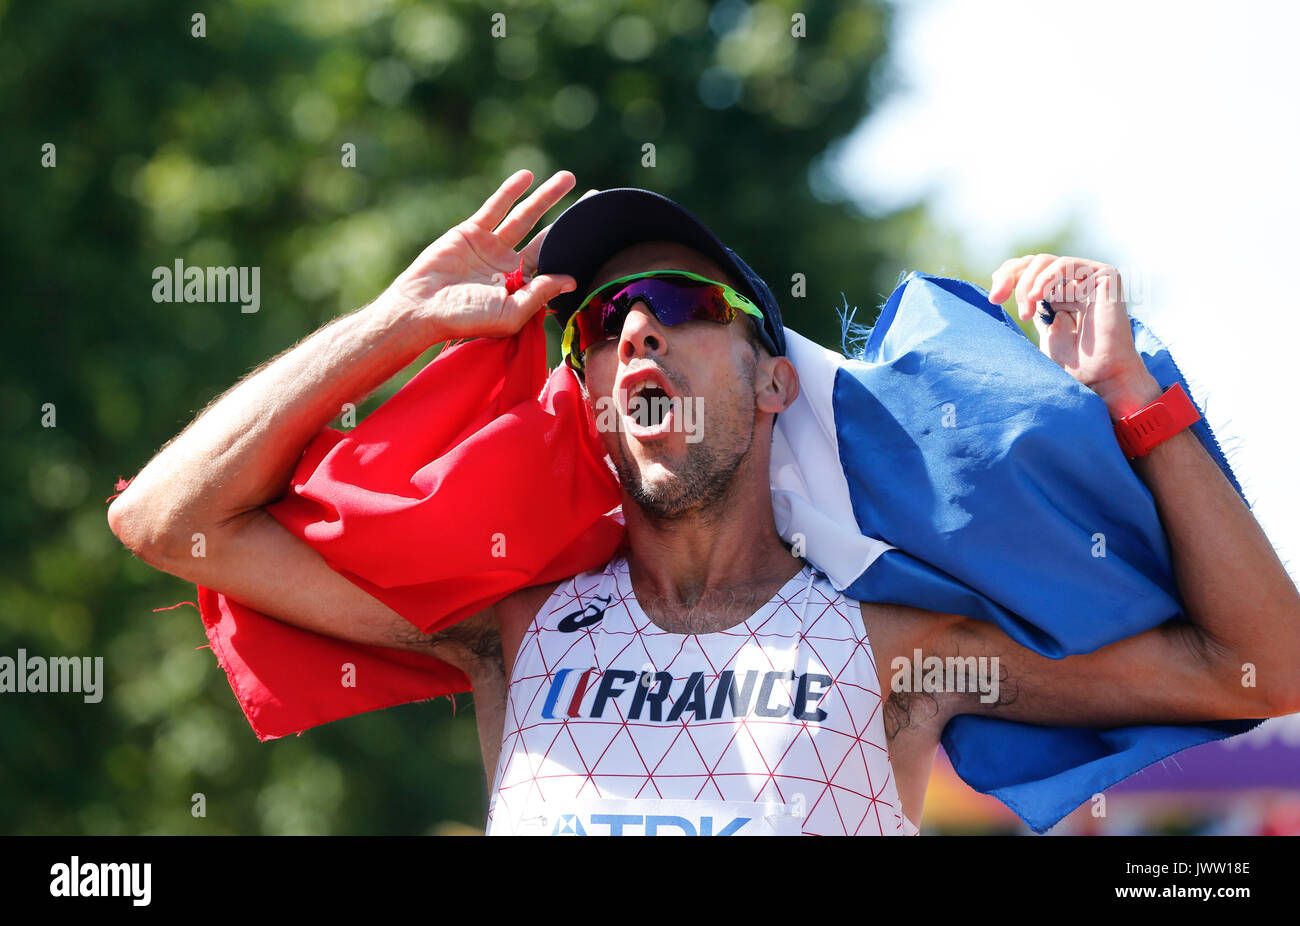 London, UK. 13th Aug, 2017. Yohann Diniz of France celebrates after the men's 50km race walk on Day 10 at the IAAF World Championships 2017 in London, Britain on Aug. 13, 2017. Credit: Han Yan/Xinhua/Alamy Live News Stock Photo